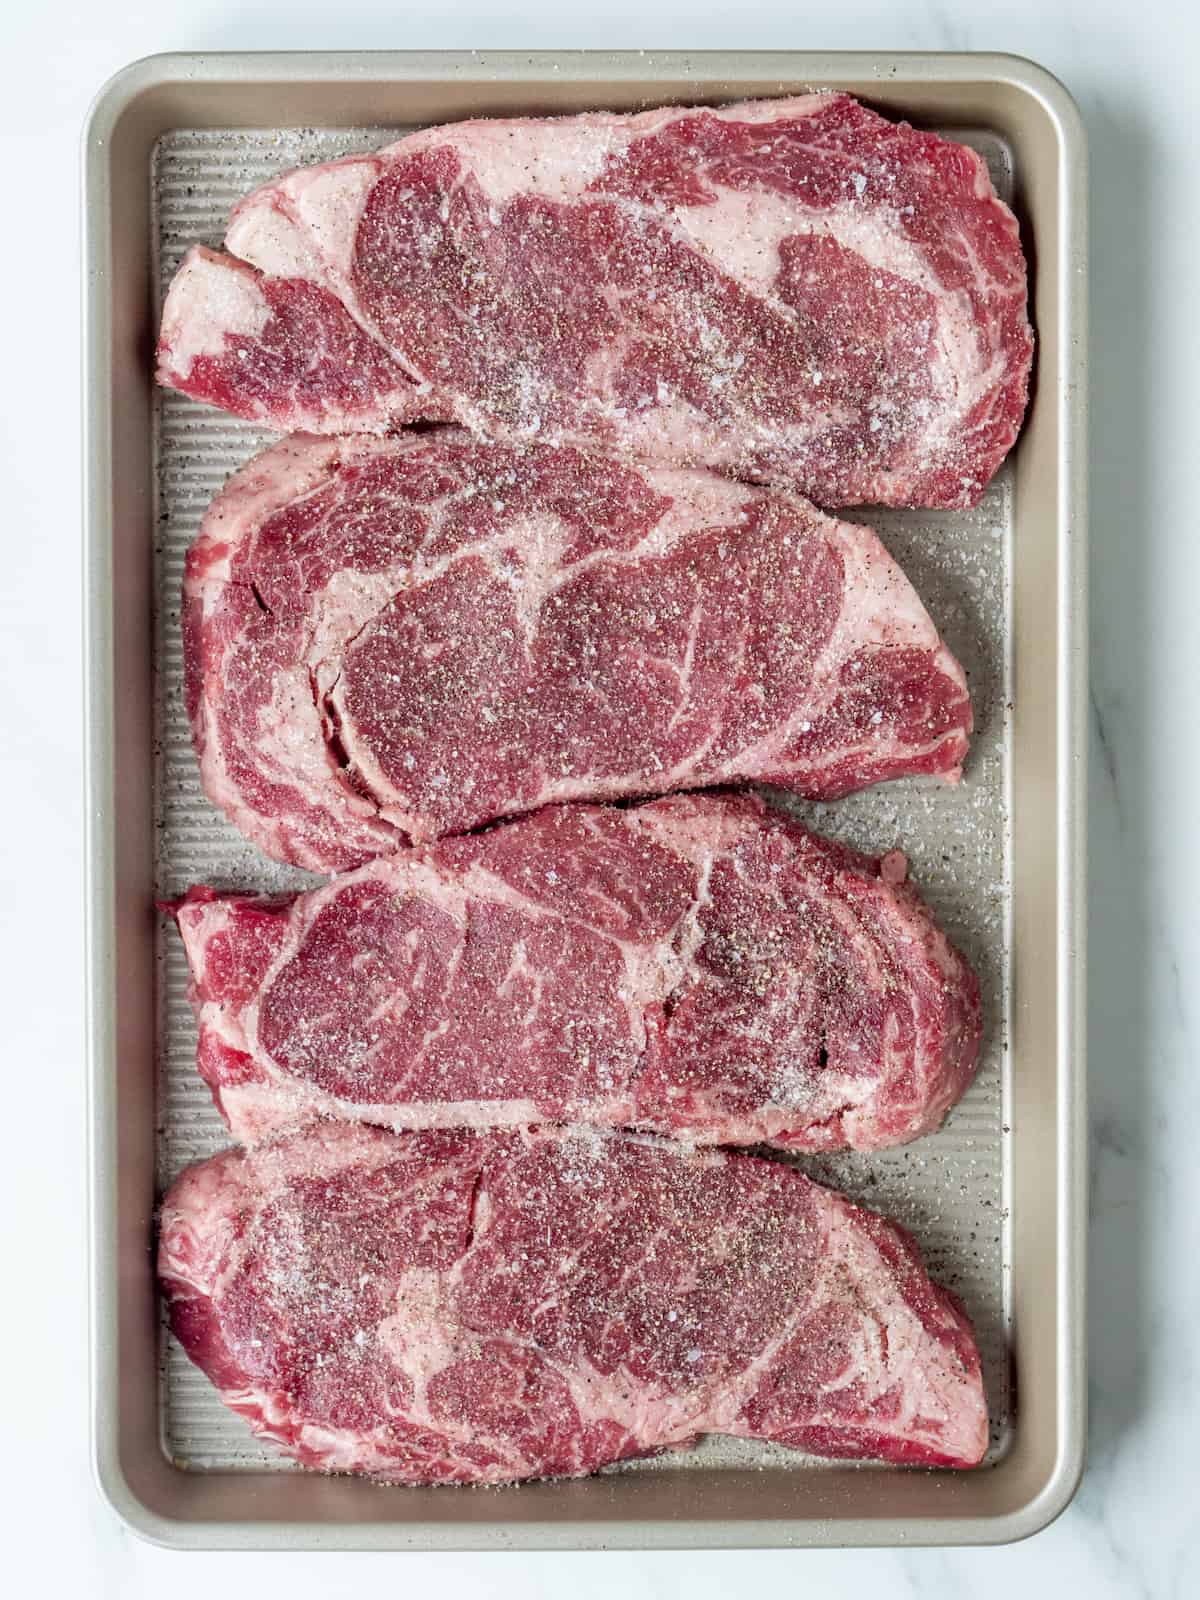 A baking sheet with ribeyes seasoned with lots of salt and pepper.